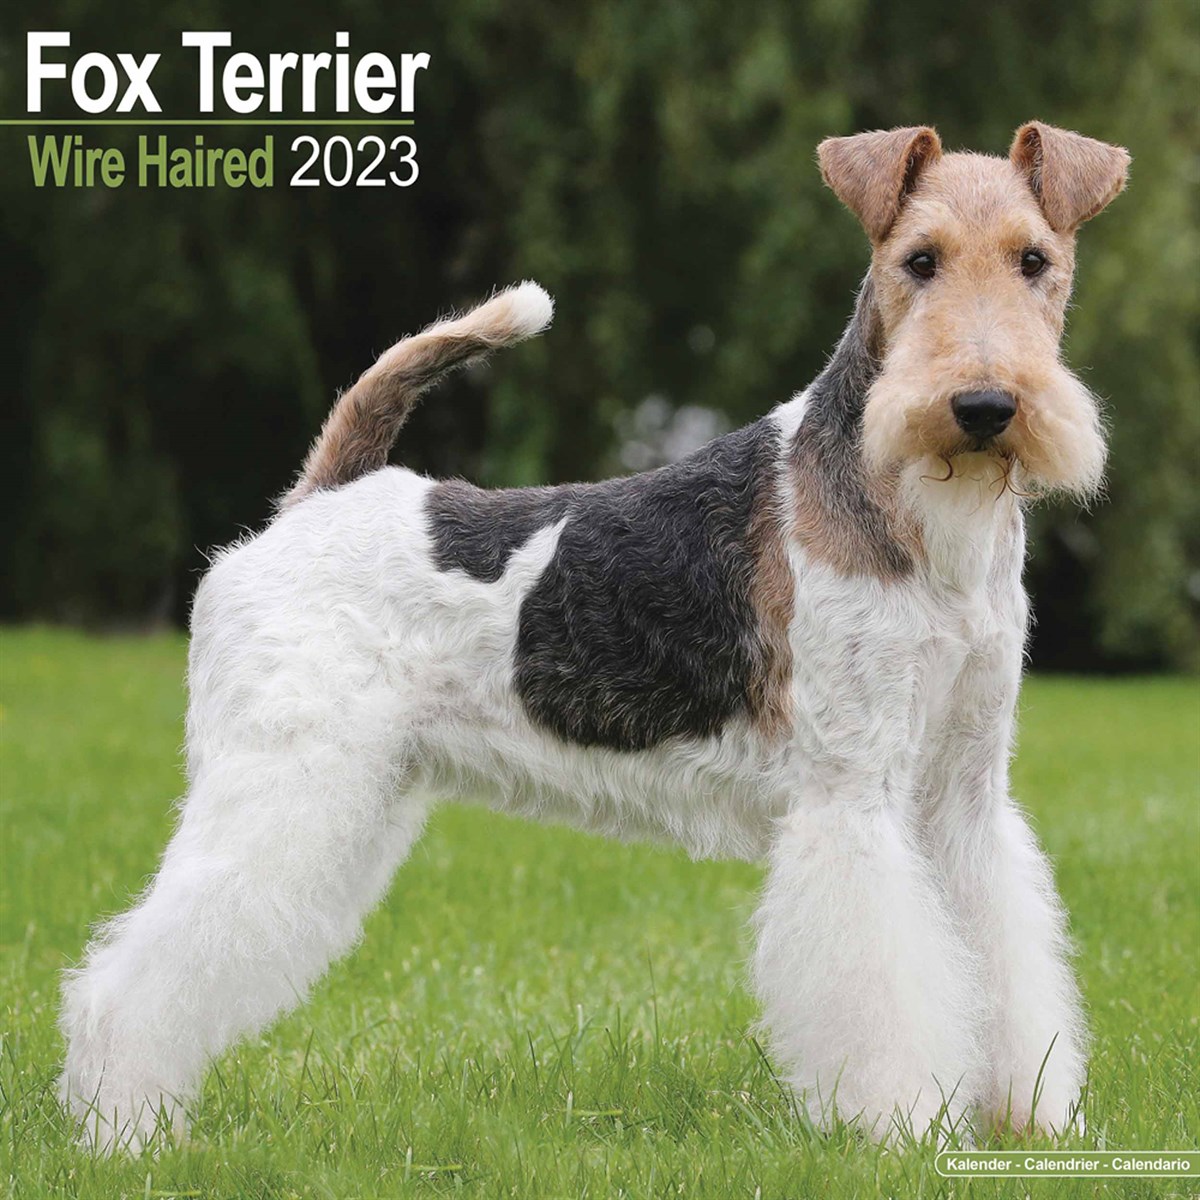 Wire Haired Fox Terrier 2023 Calendars